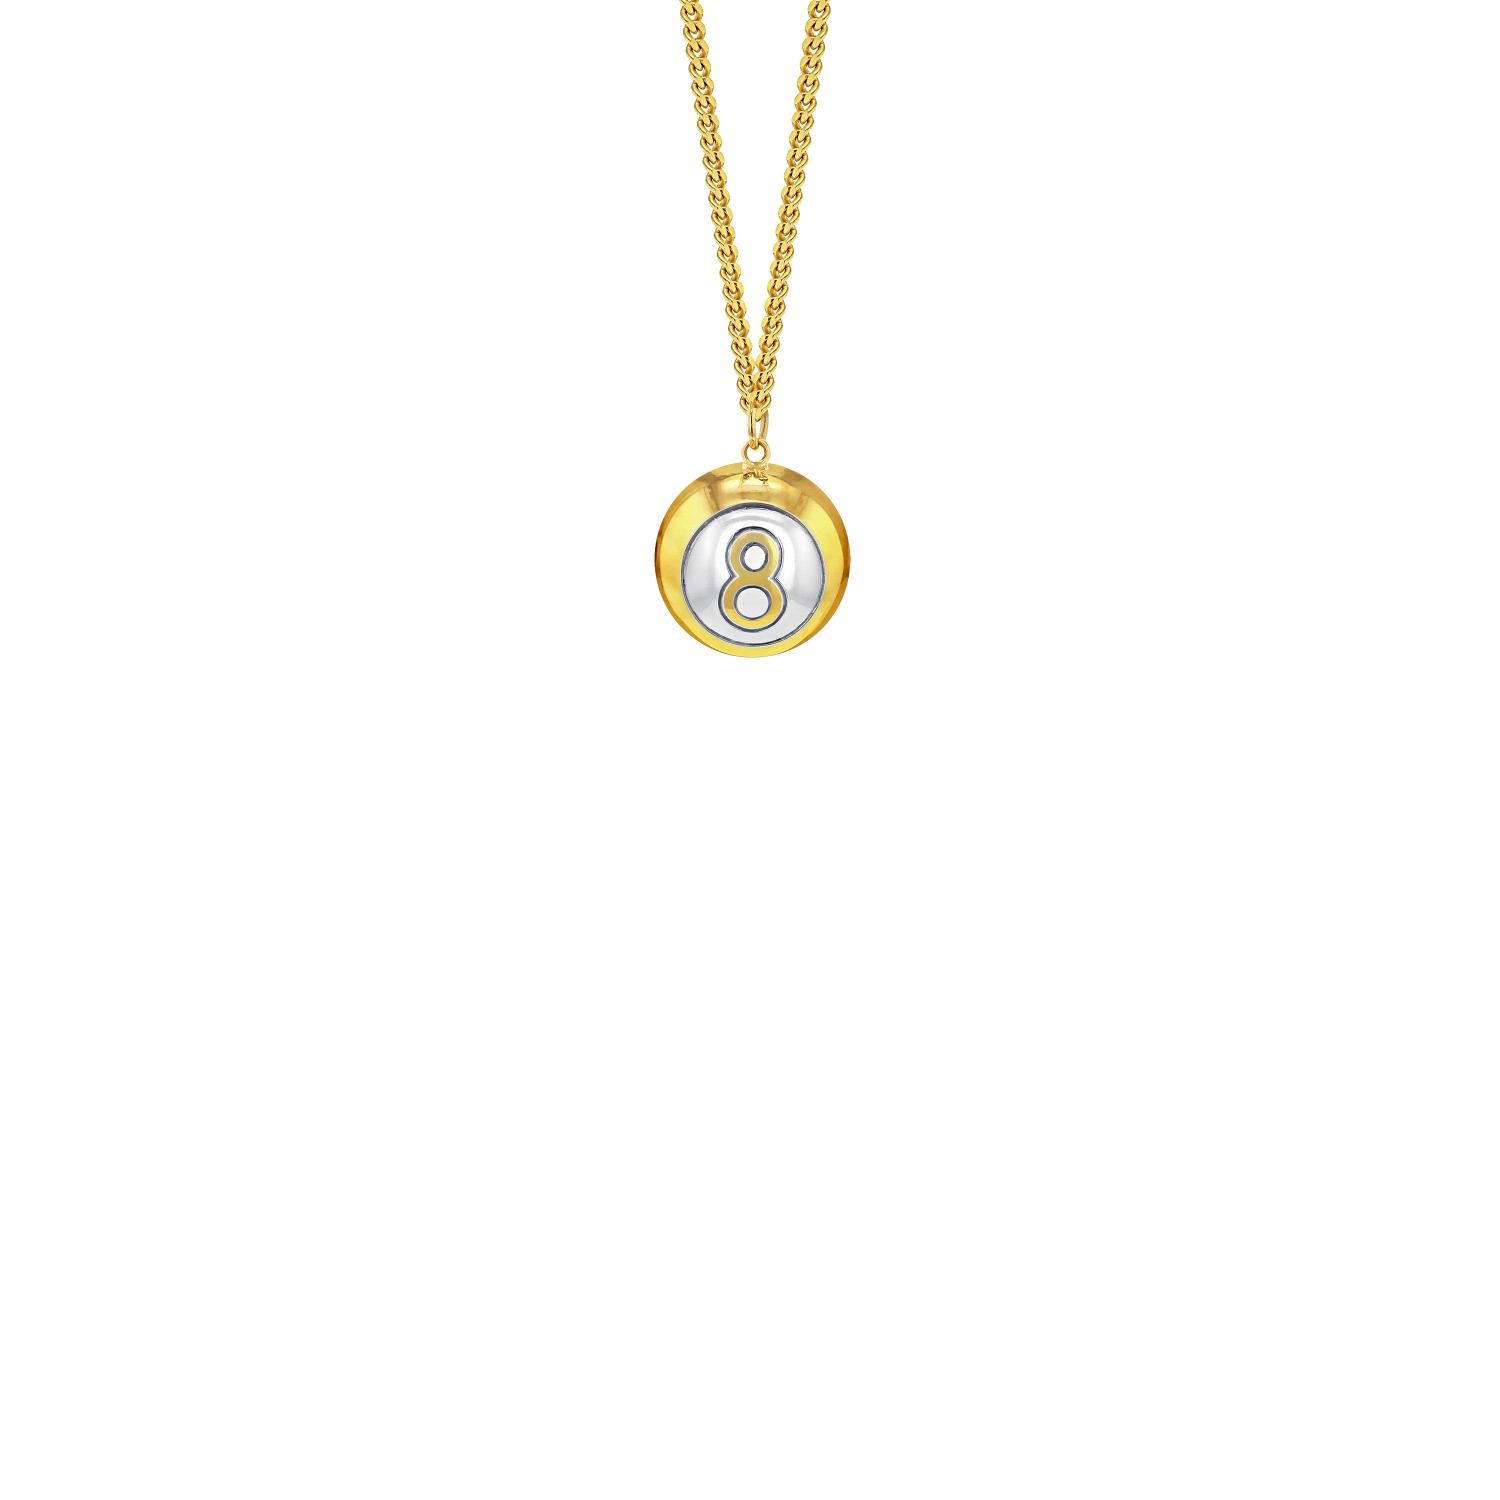 Men’s 8 Ball Mini Pendant 2Tone 18Kt Gold-Plate With Sterling Silver Detail True Rocks